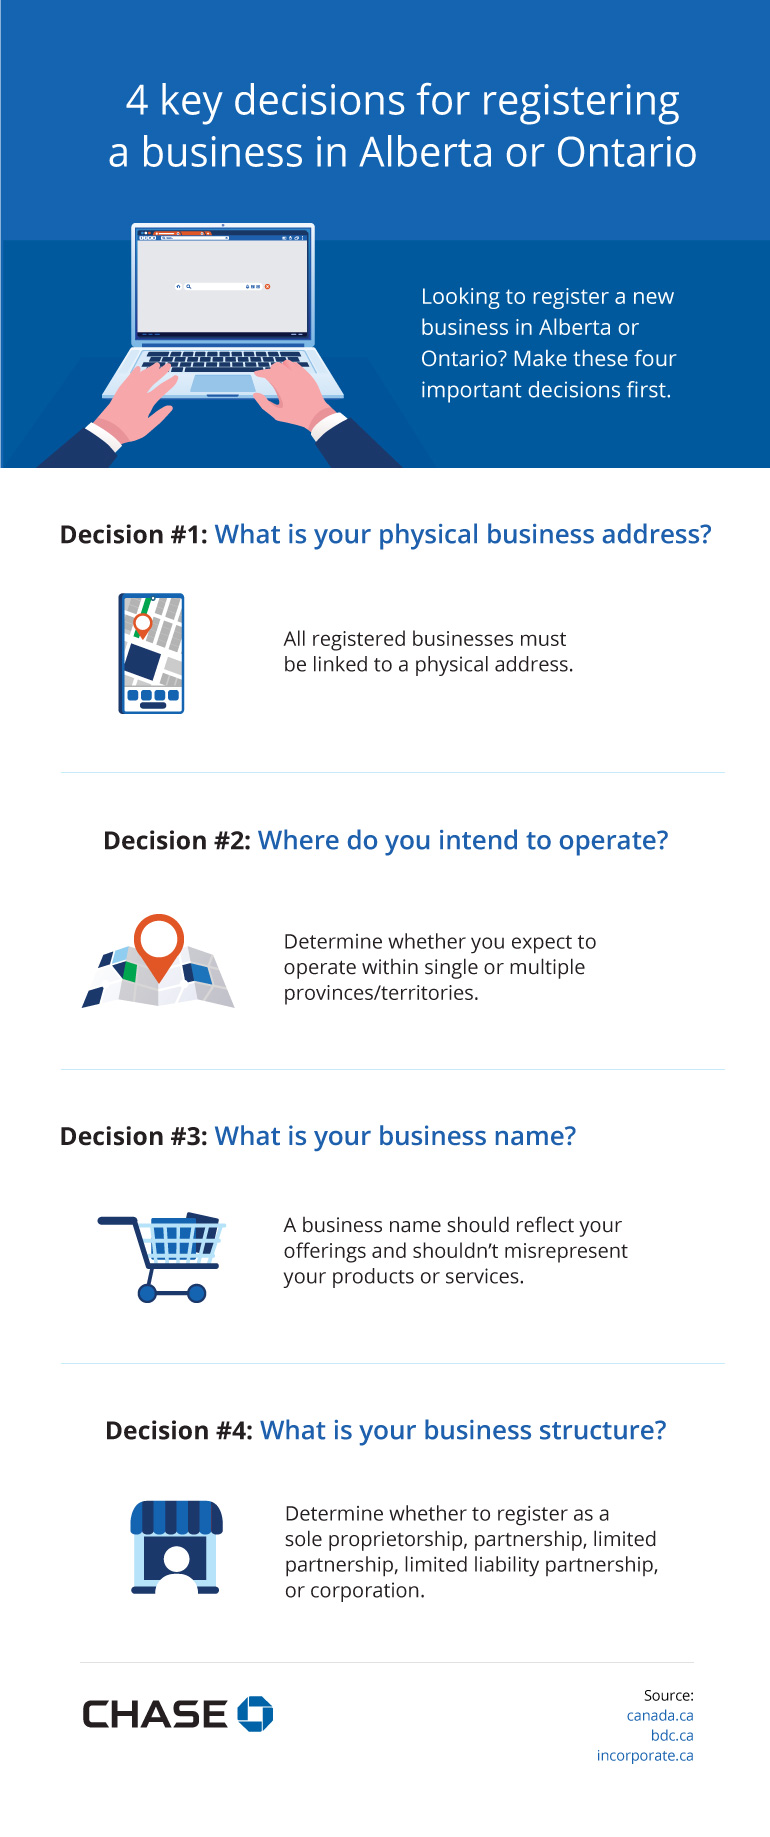 Infographic illustrating the 4 key decisions for registering a business in Alberta or Ontario